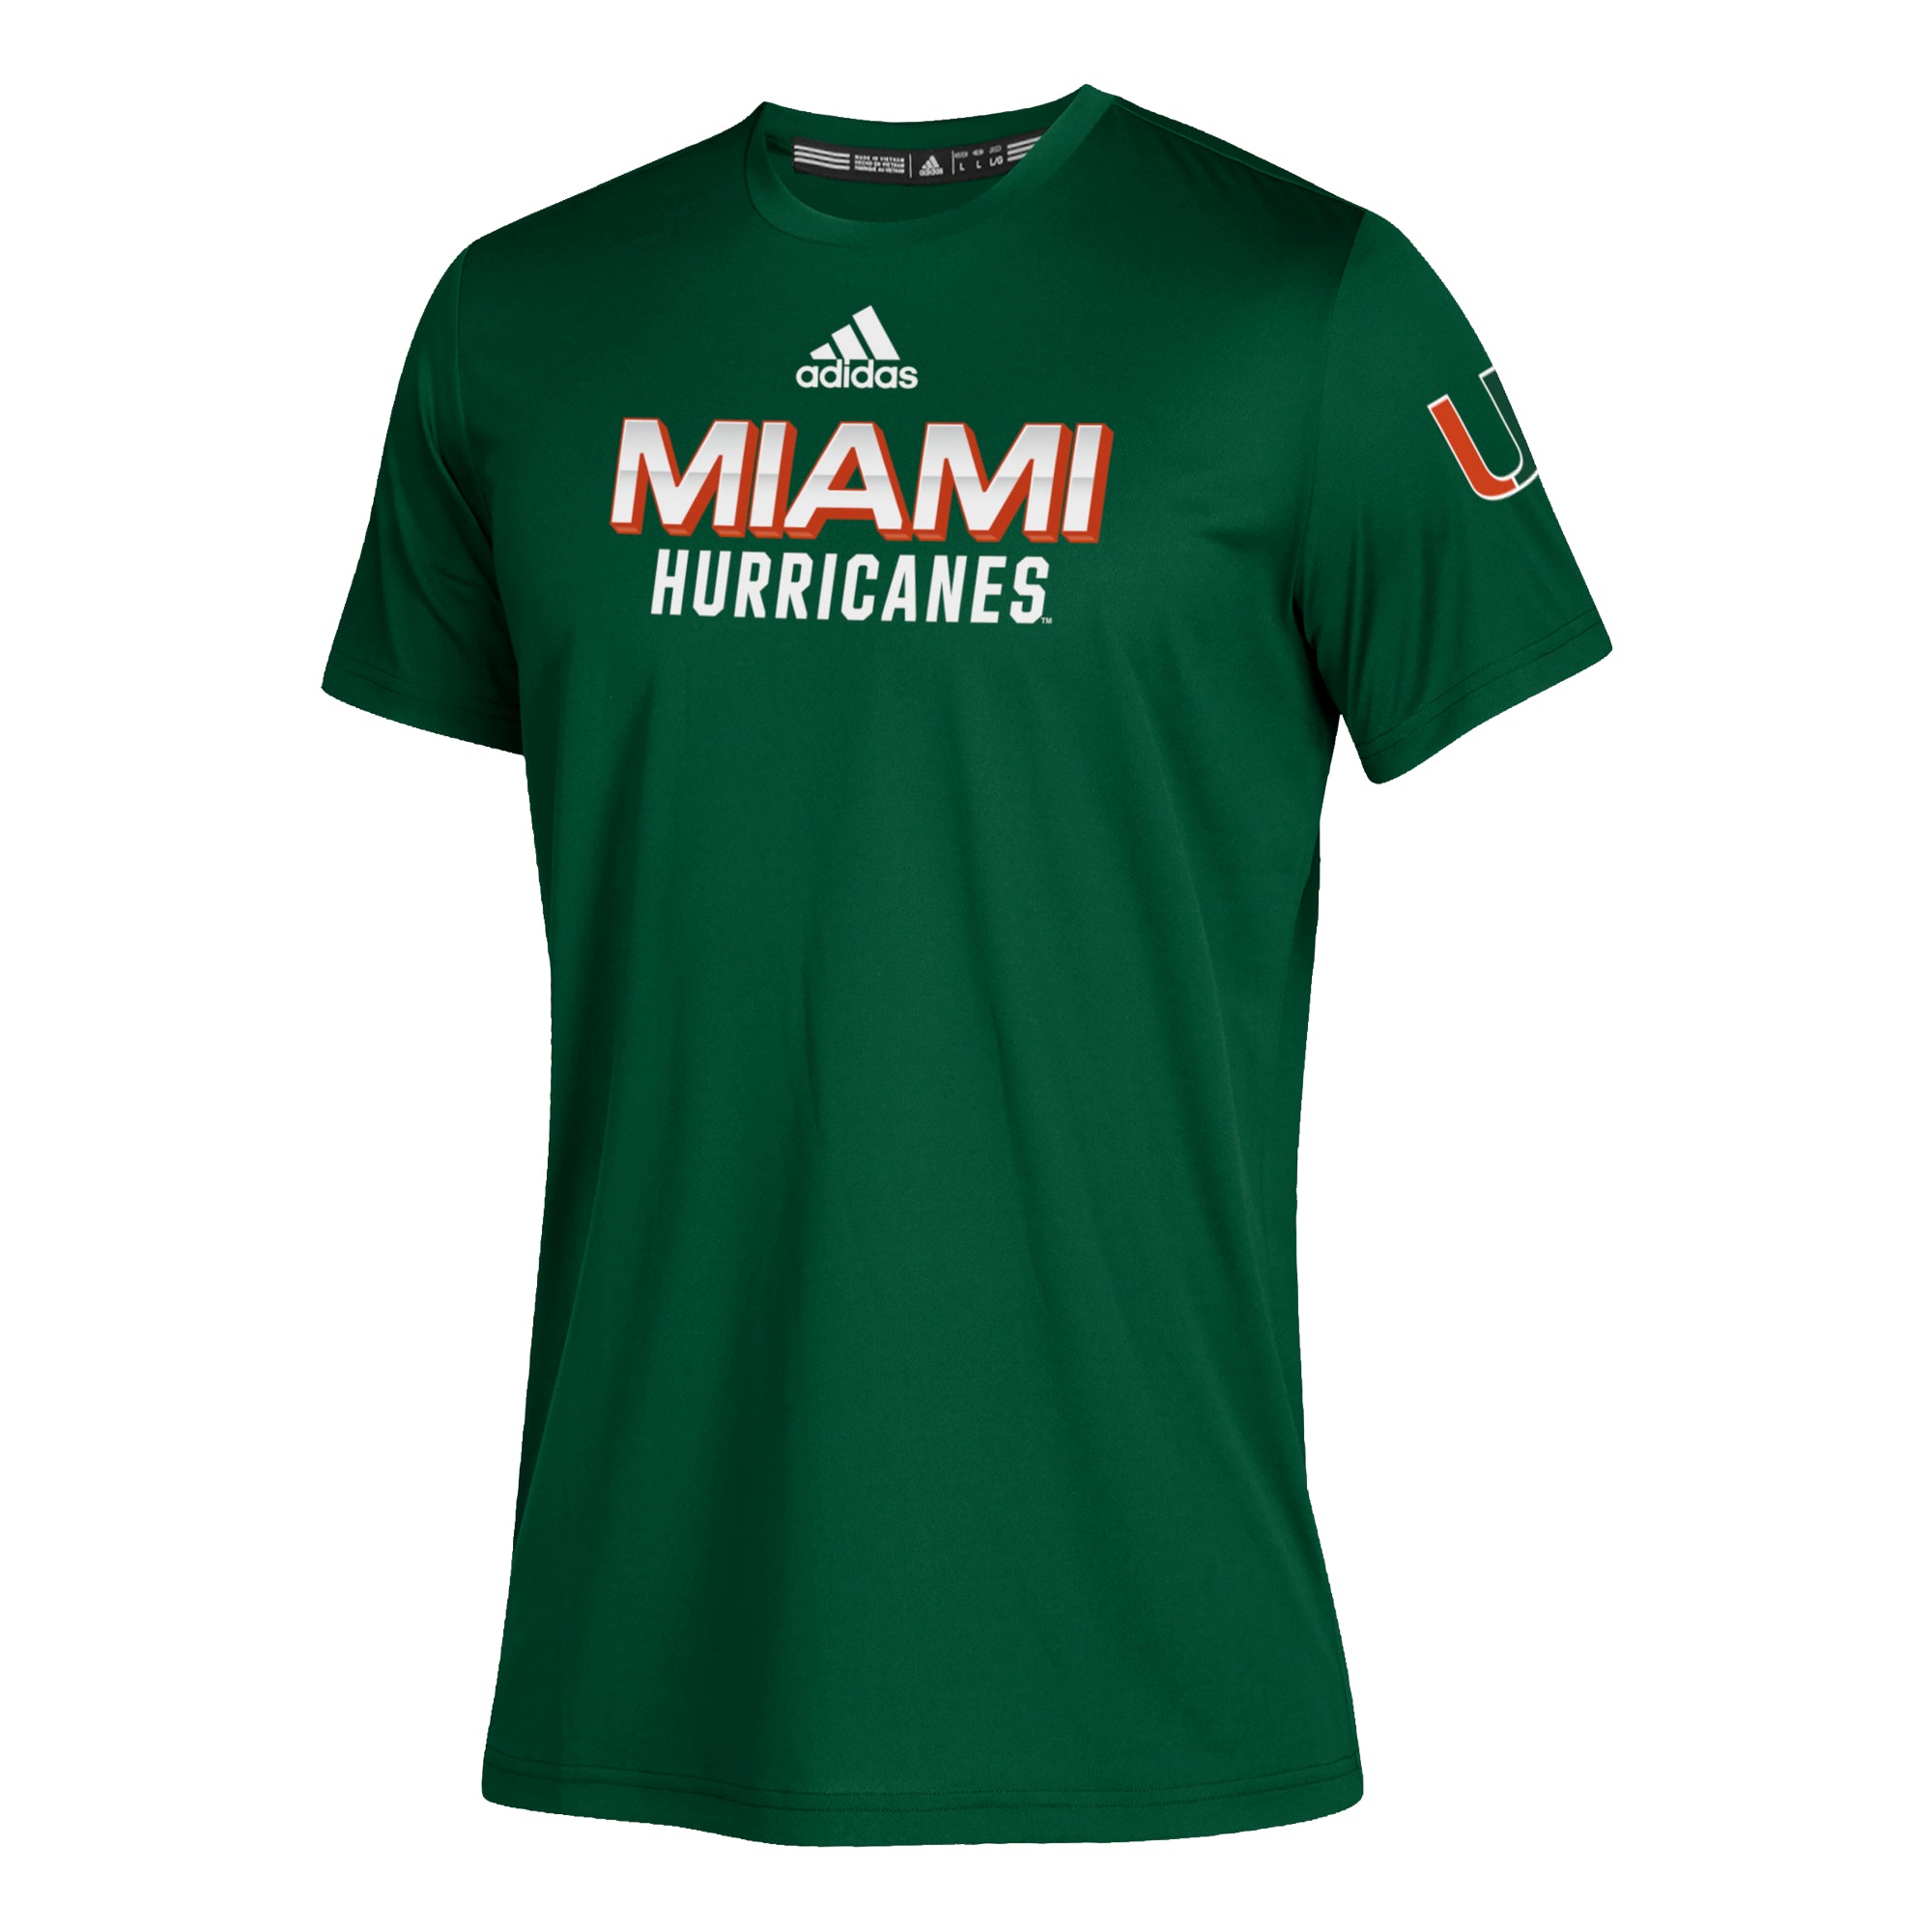 Miami Hurricanes adidas Youth CLIMATCH SS T-Shirt - Green